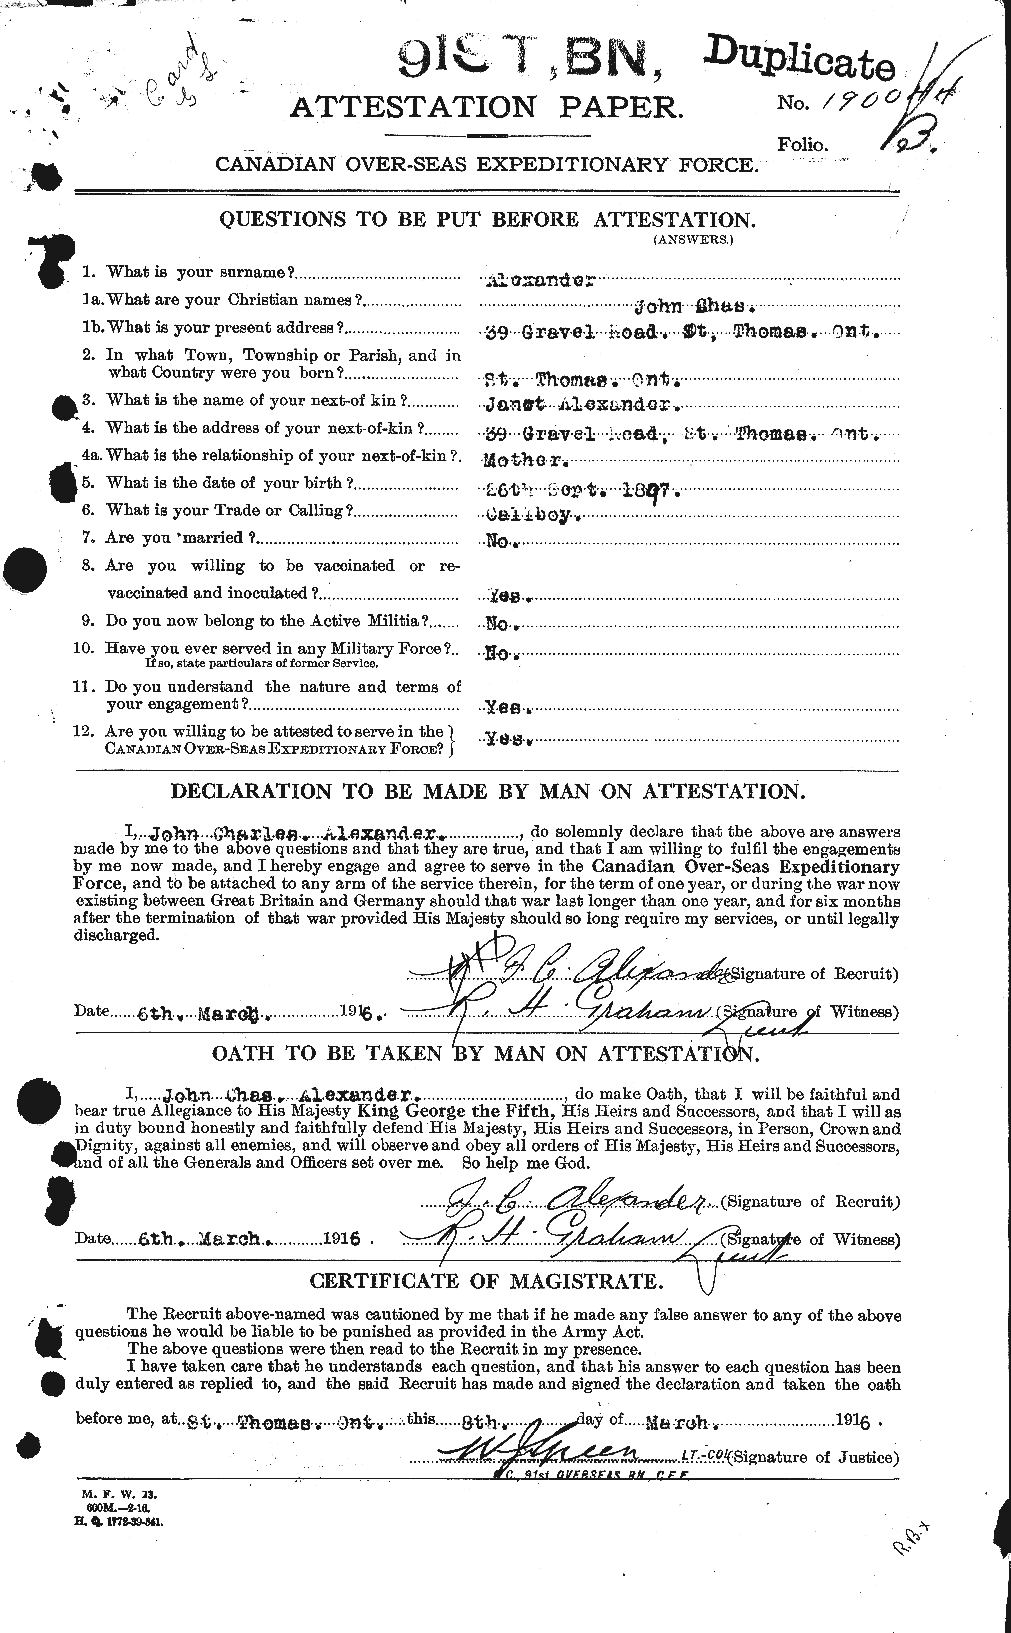 Personnel Records of the First World War - CEF 204267a